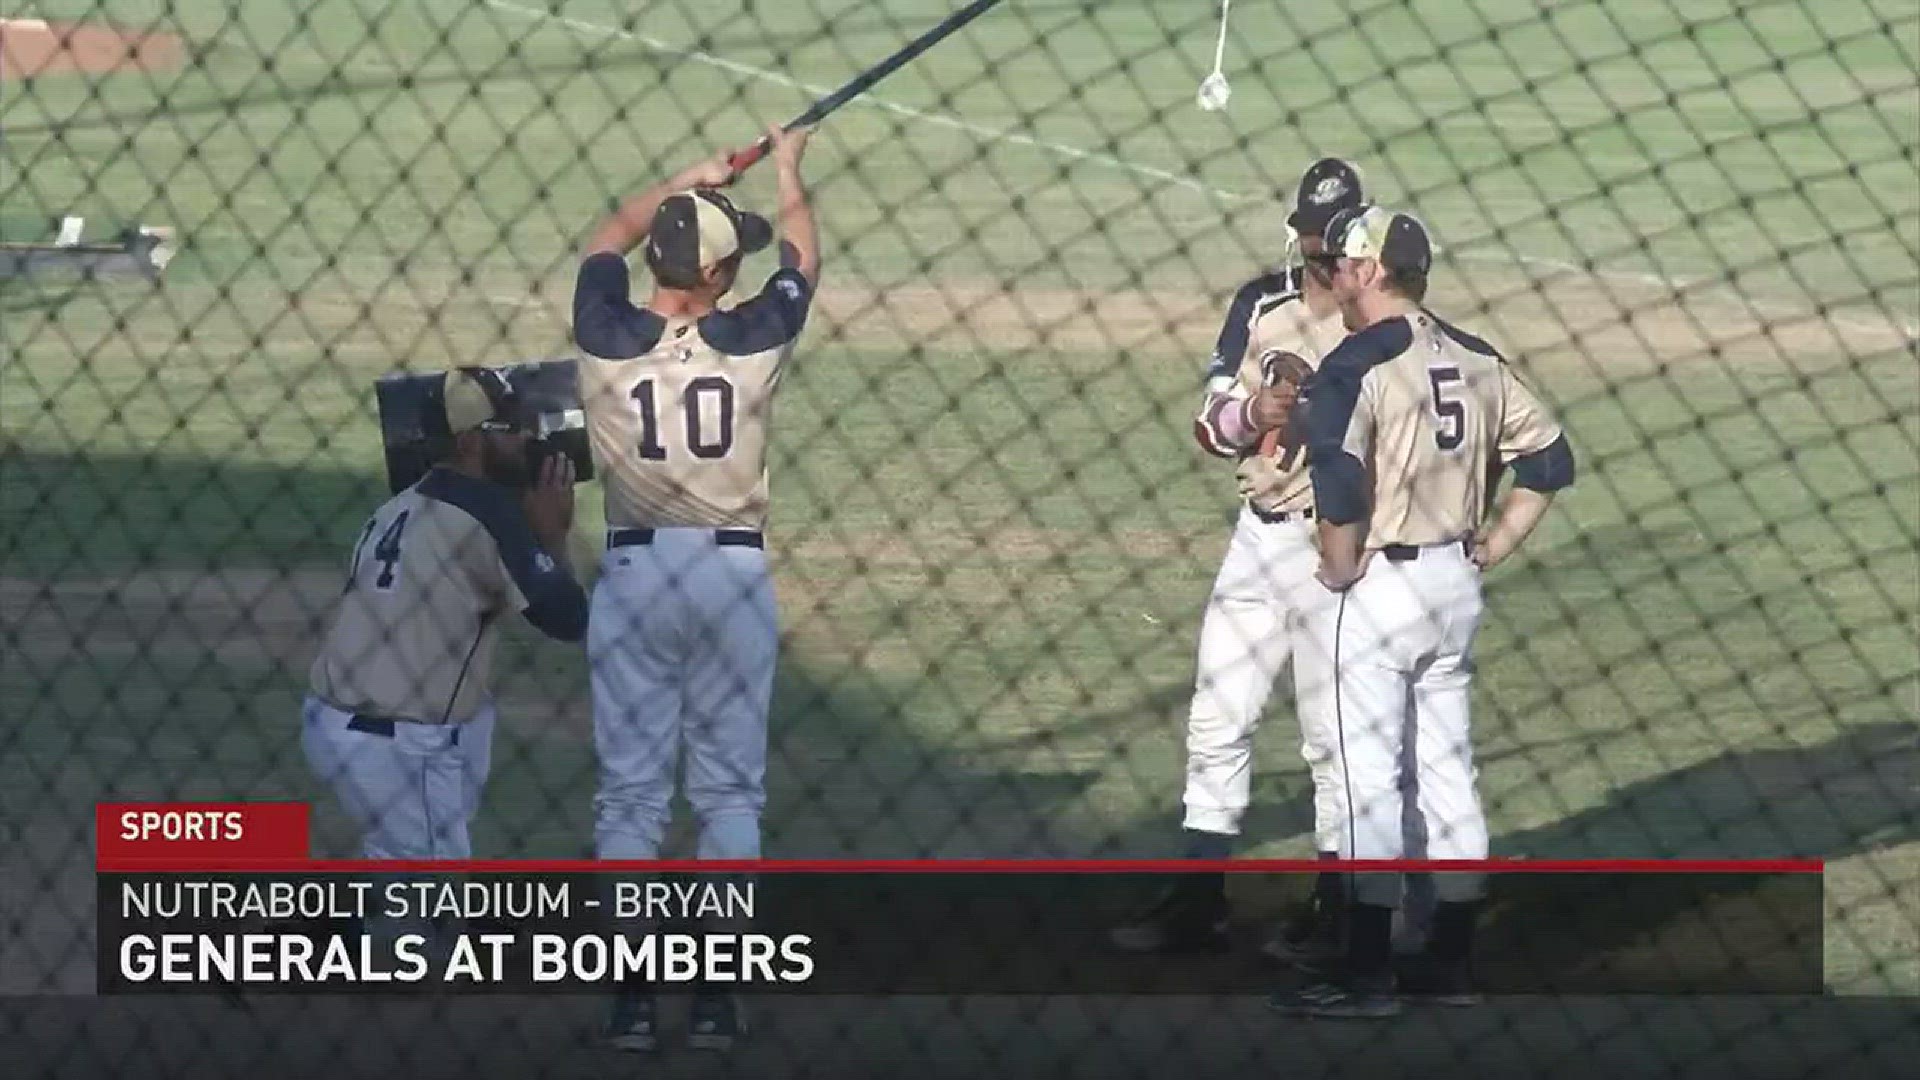 The Brazos Valley Bombers defeated the Victoria Generals 7-1 on Tuesday night.